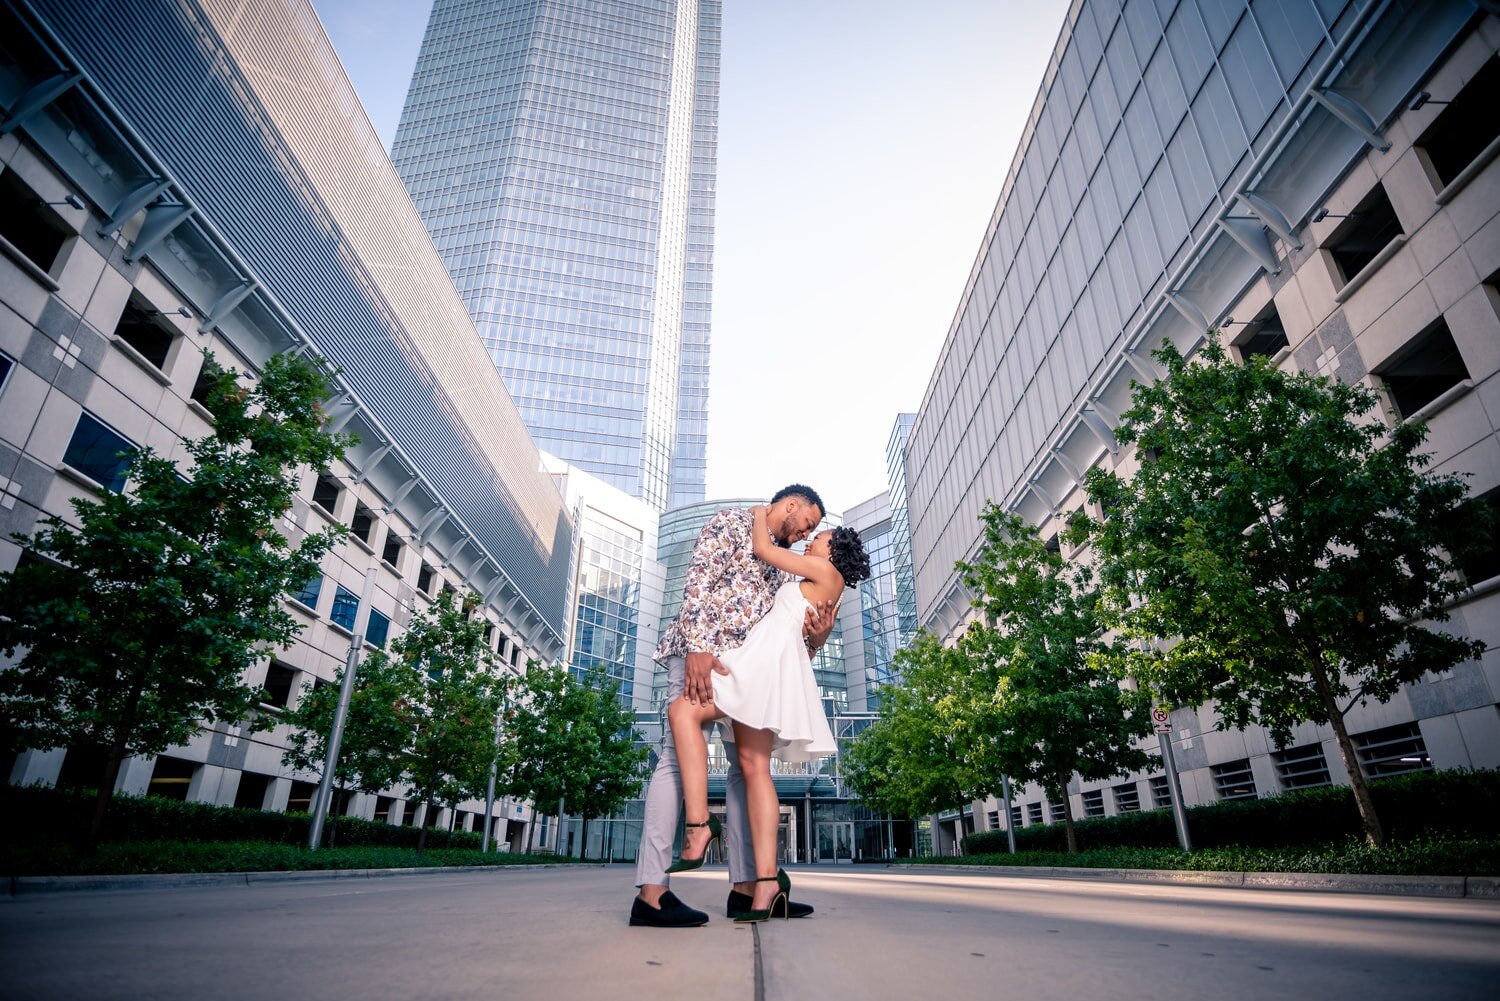 engagement-photography-downtown-beautiful-couple-dip-buildings-street-chadandbriephotography.jpg